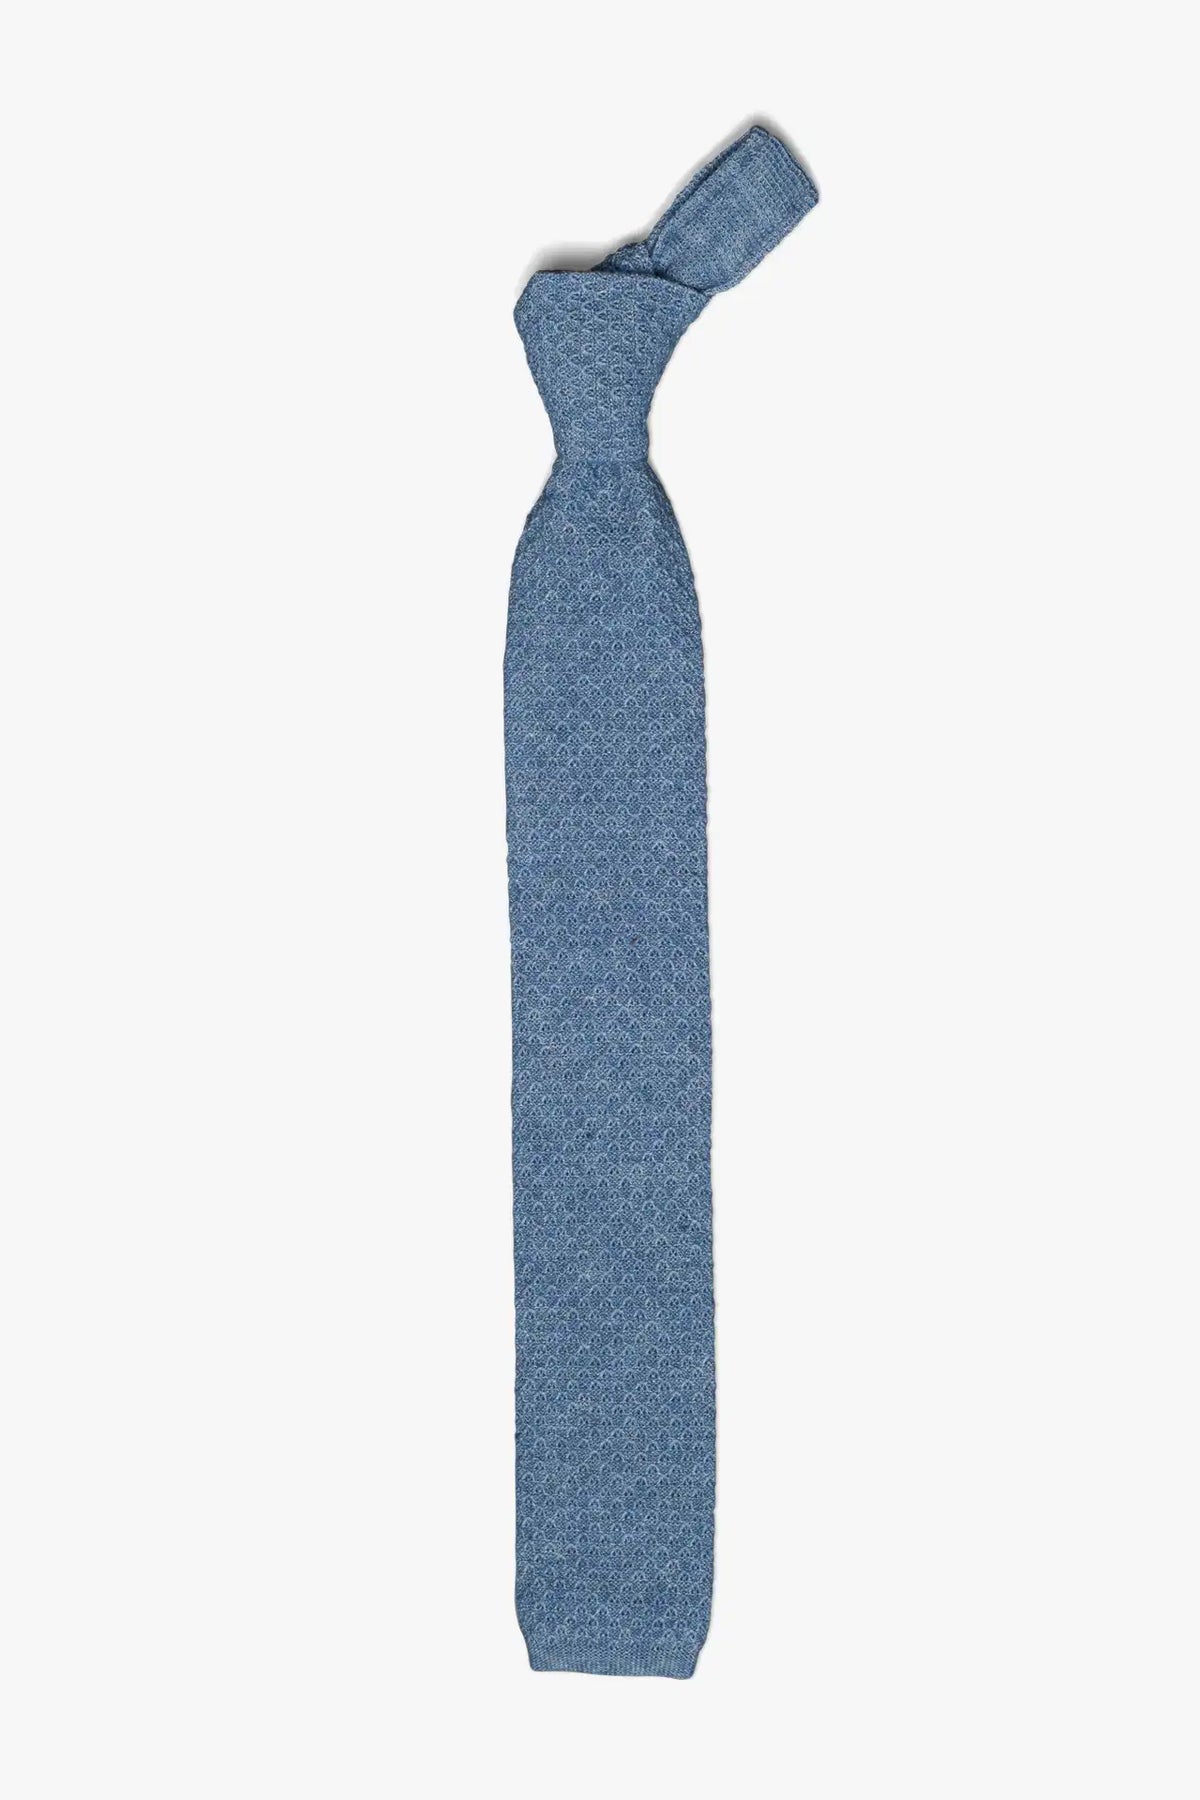 Blue cotton knitted tie with matching pocket square.  Minimalist Swedish design made in Italy. 